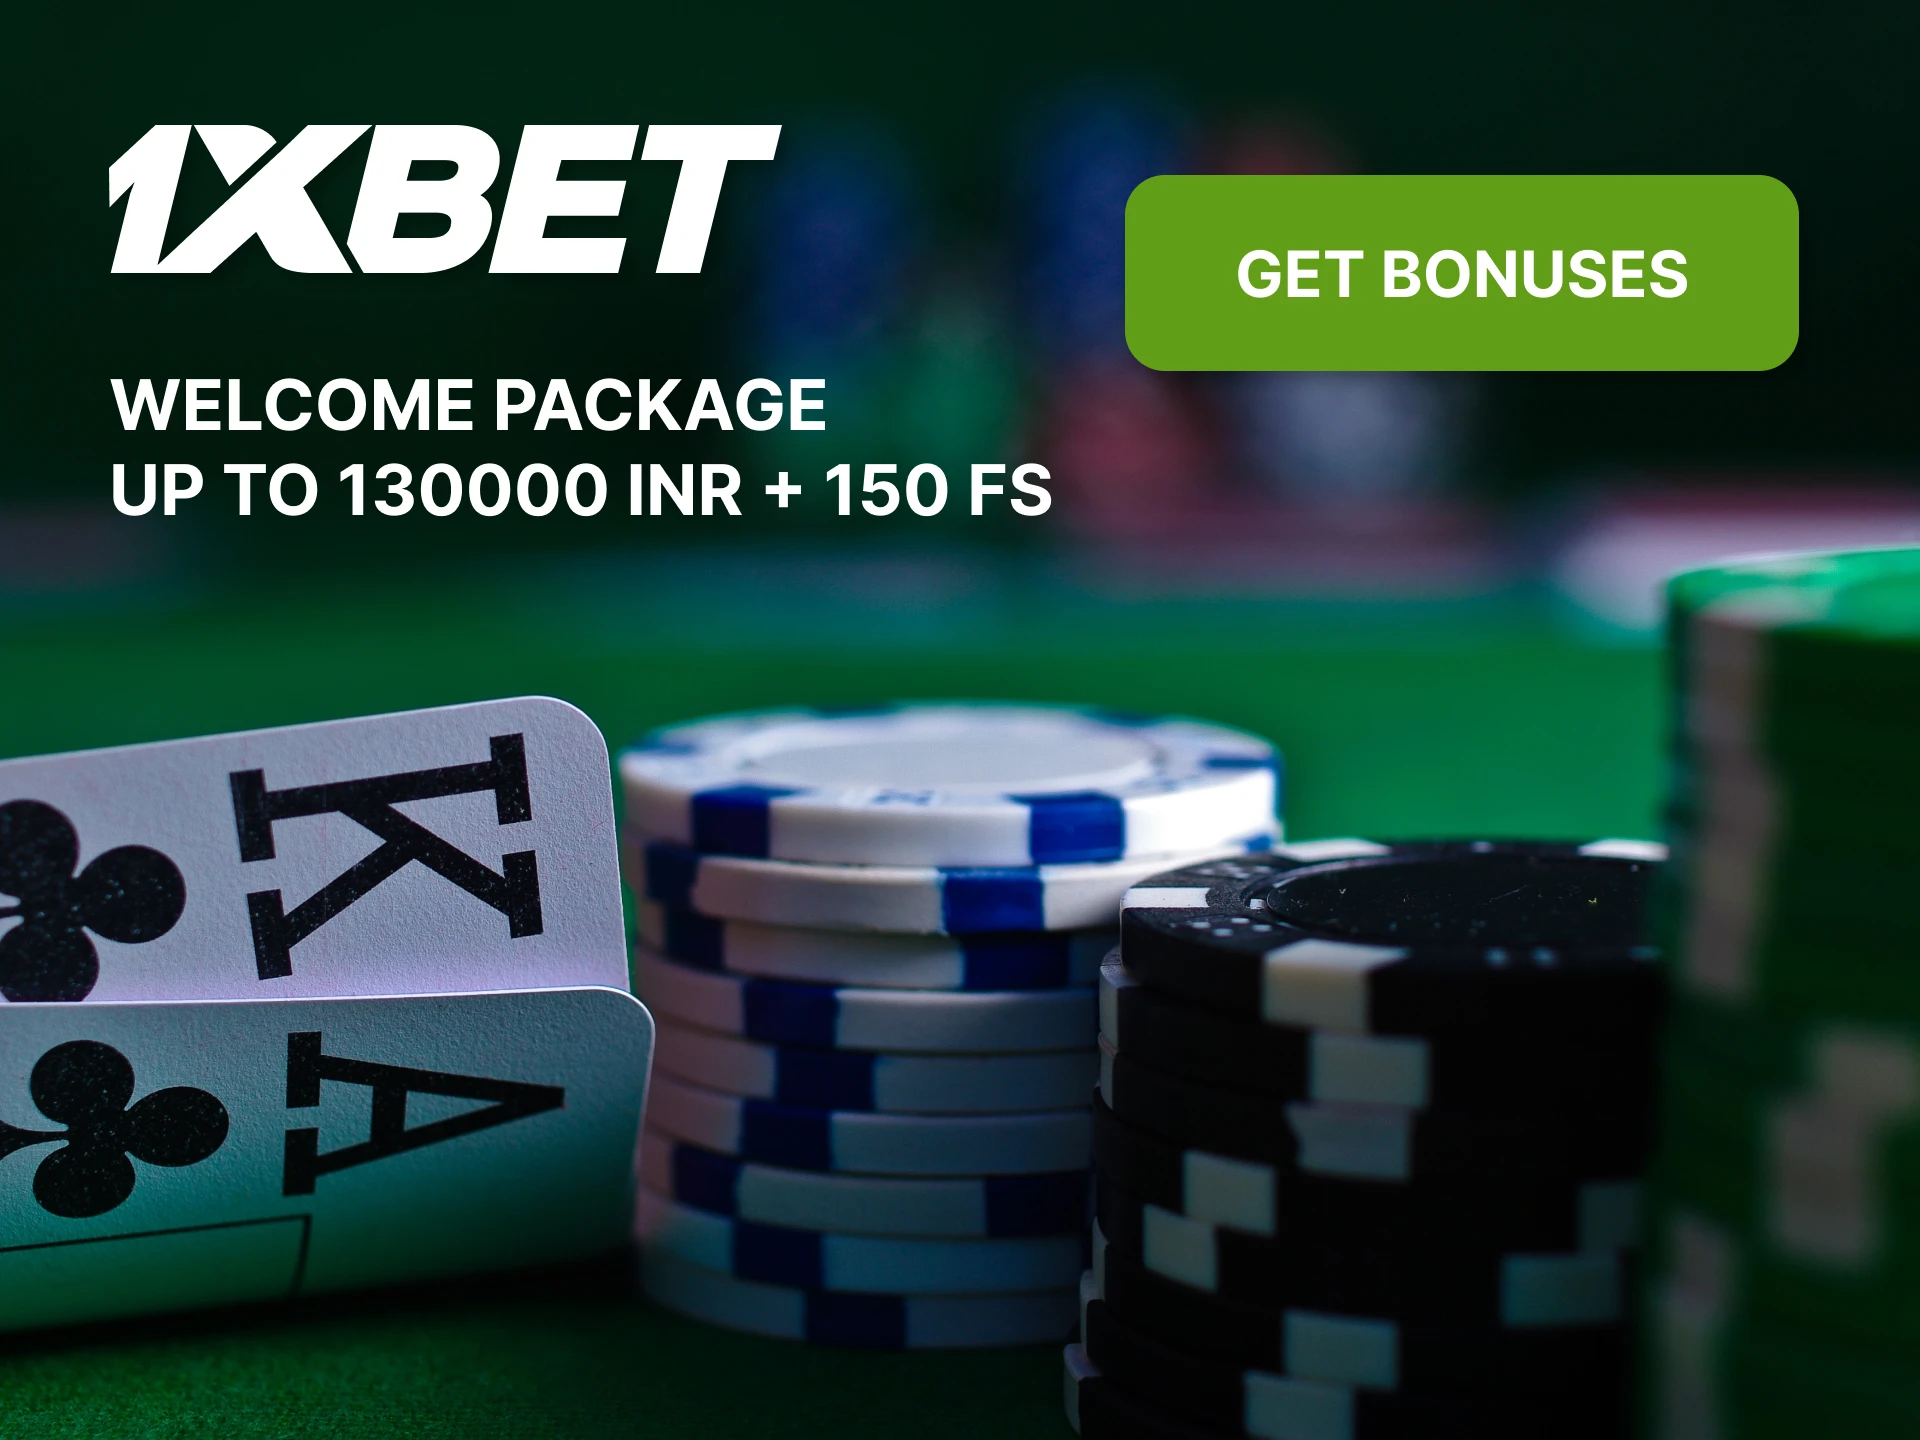 Get your lucrative bonus for Live Casino games at 1xBet after your first deposit.